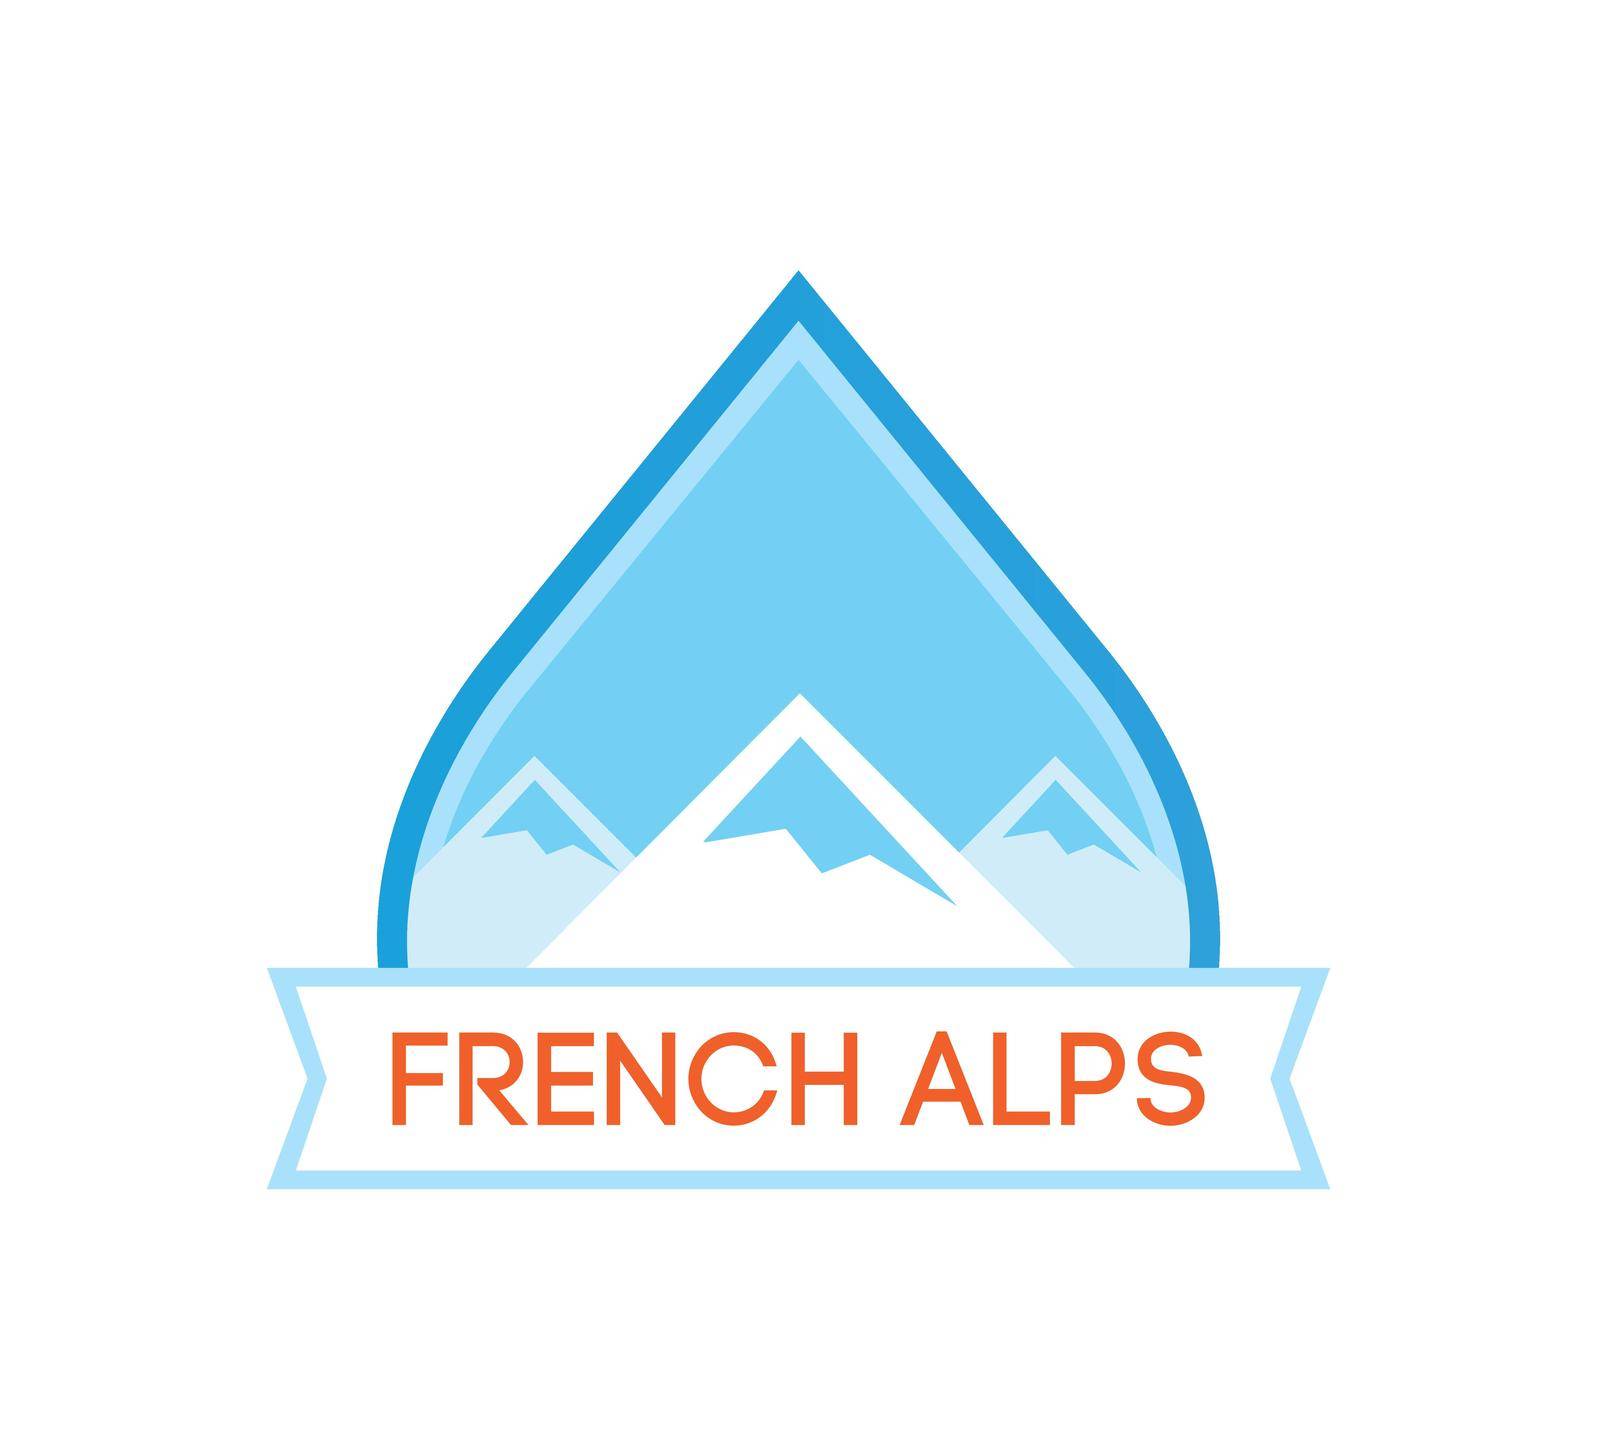 Logotype with Nature Landscape of French Alps in Blue colors. Vector Emblem isolated on White background.